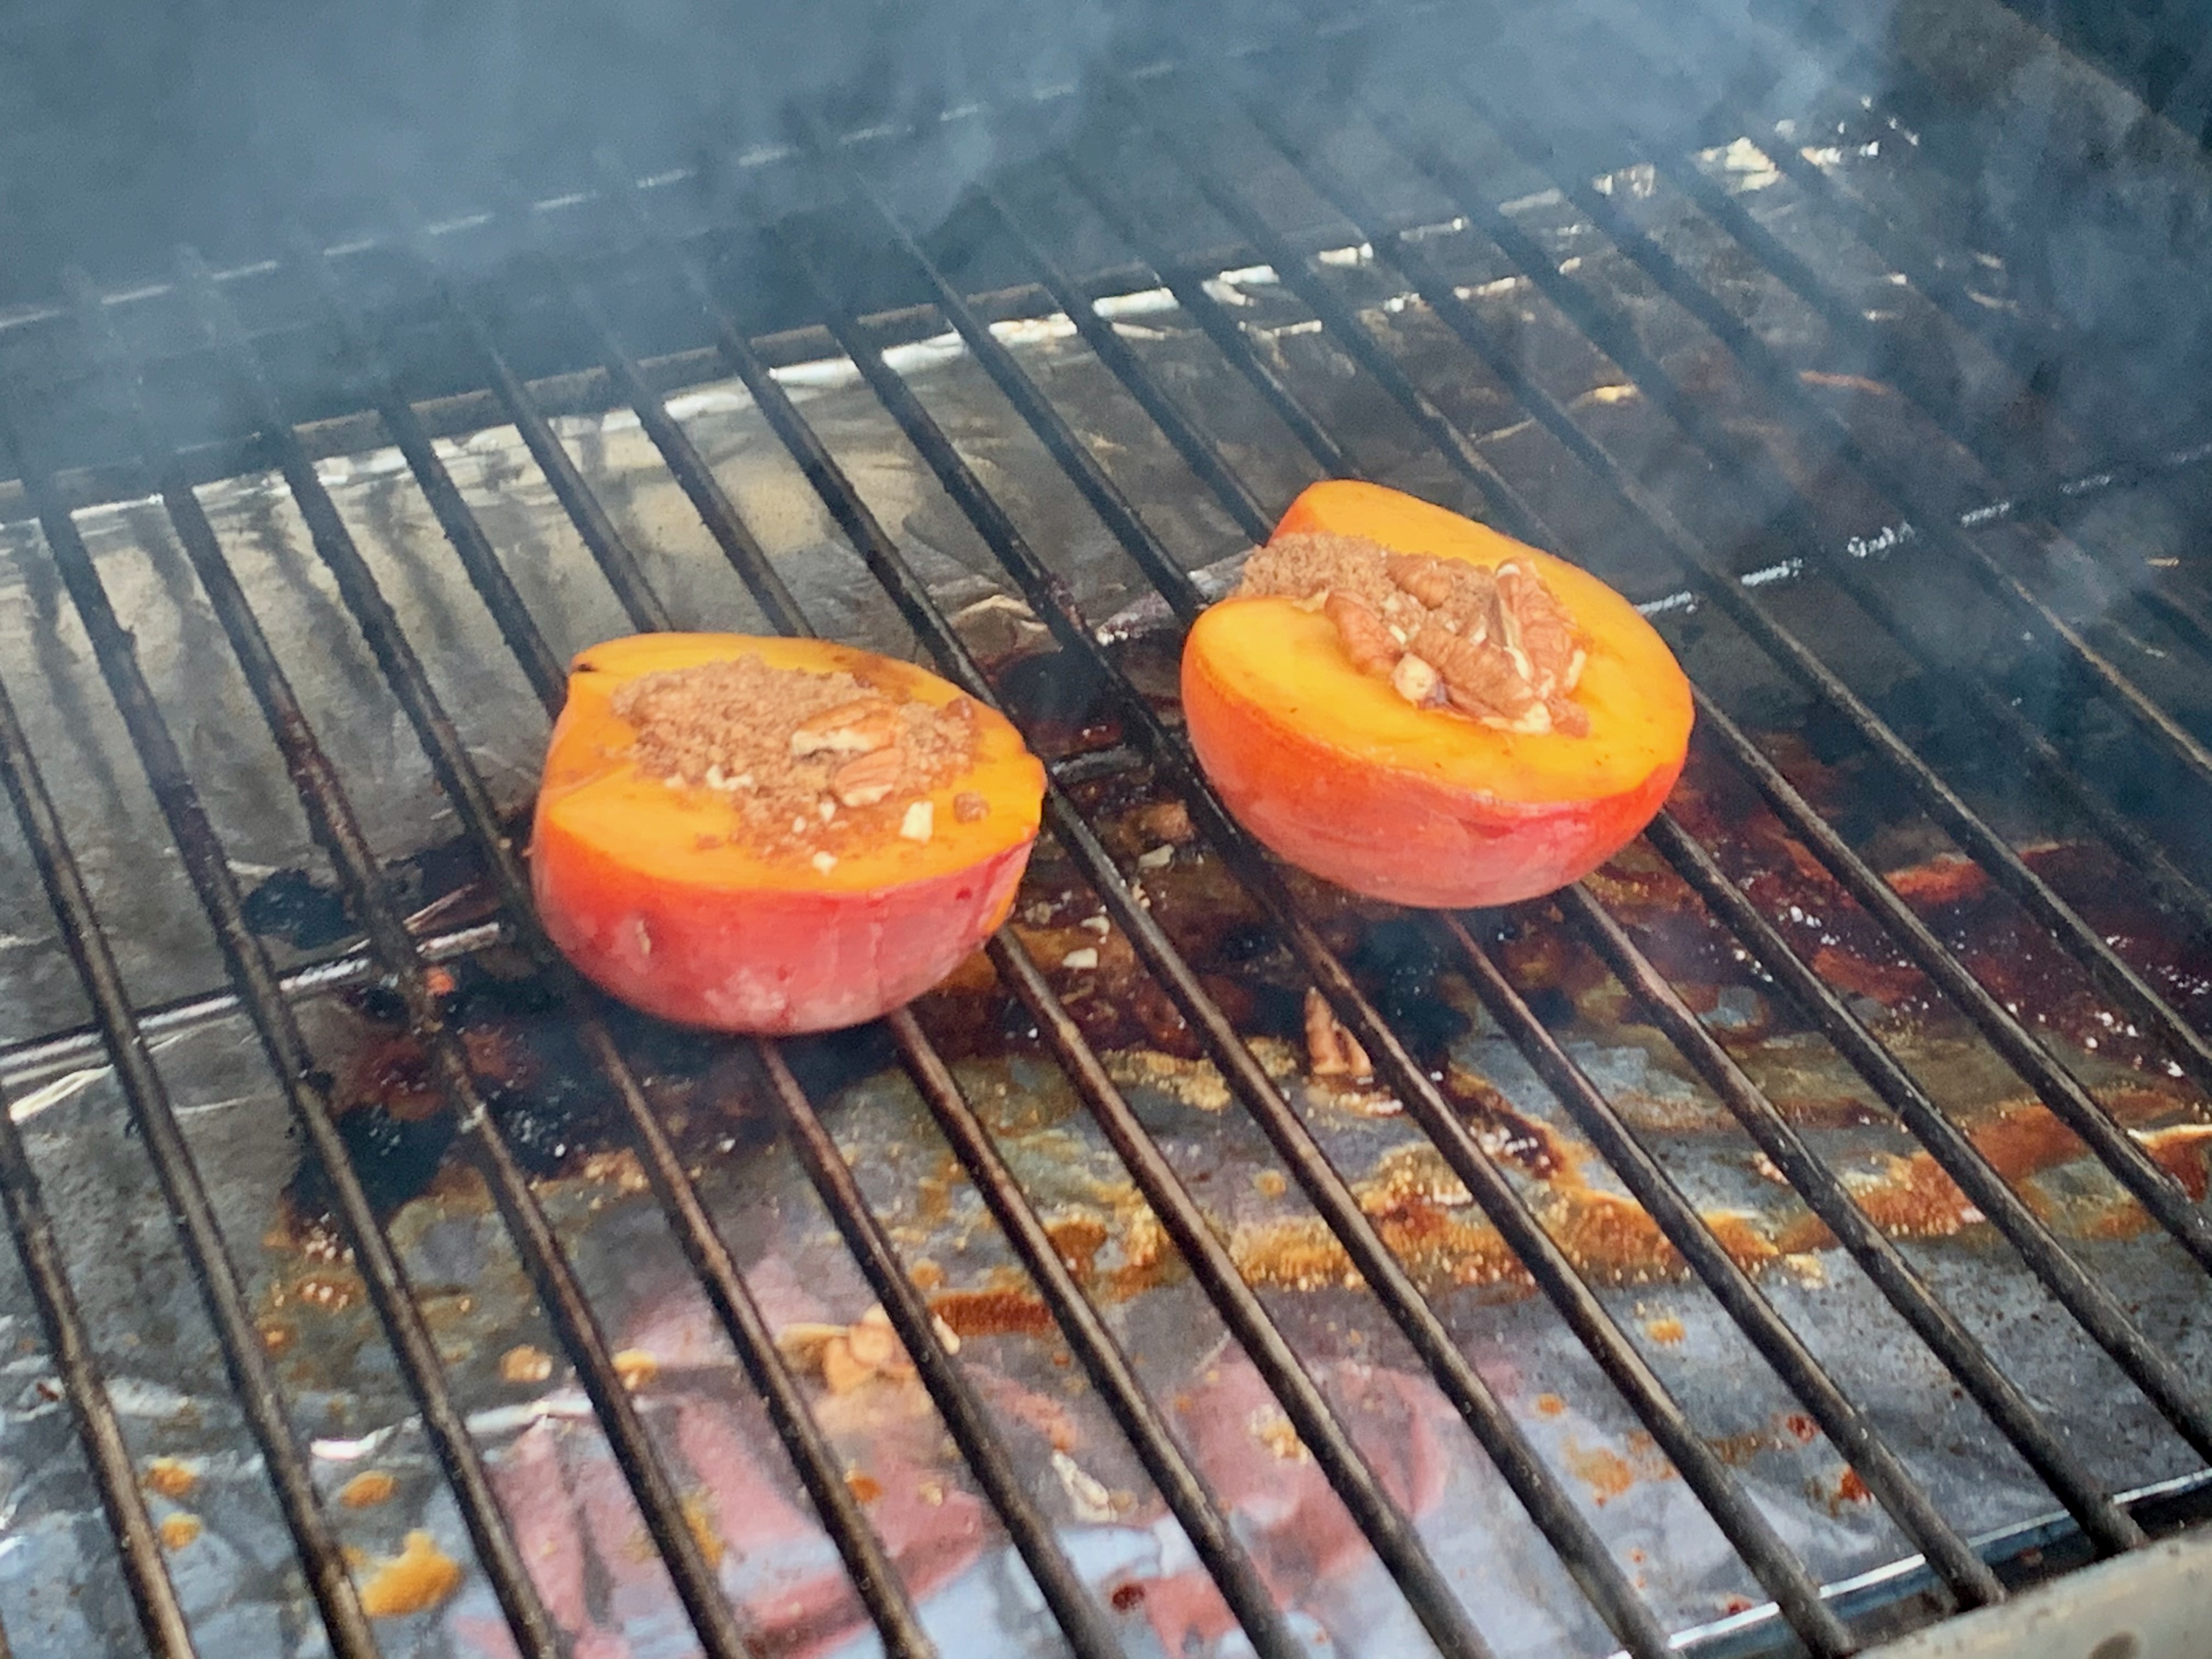 Peaches on the Grill 20200727.jpeg